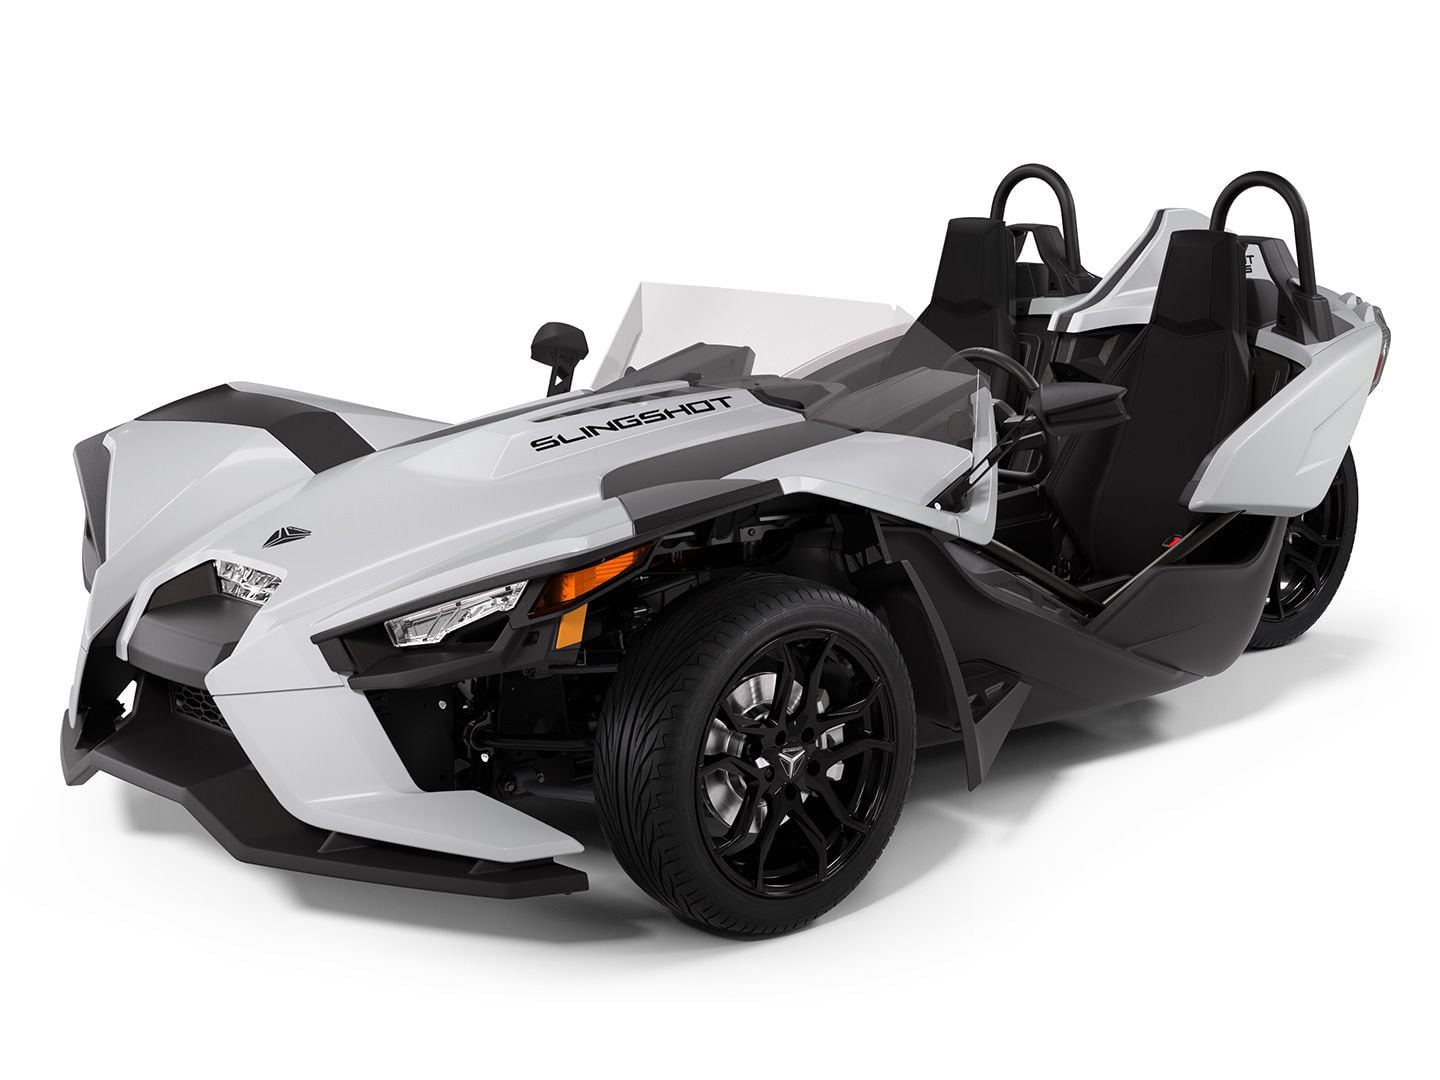 The most affordable entry into the Slingshot family is the Slingshot S with a manual transmission and Moonlight White paint. MSRP is $21,499.